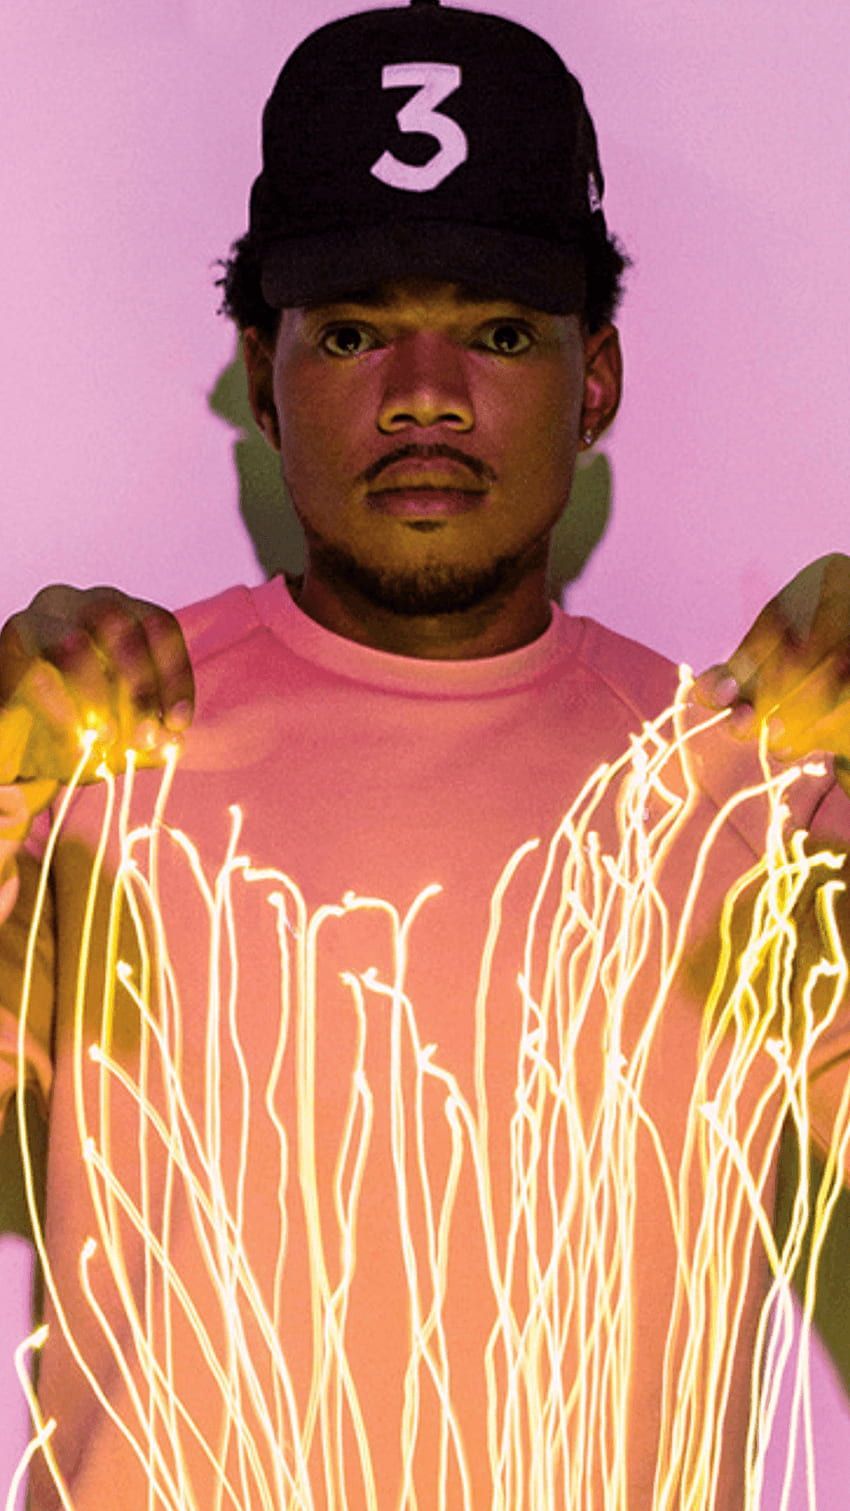 Chance the Rapper wallpaper for iPhone and Android - Chance the Rapper